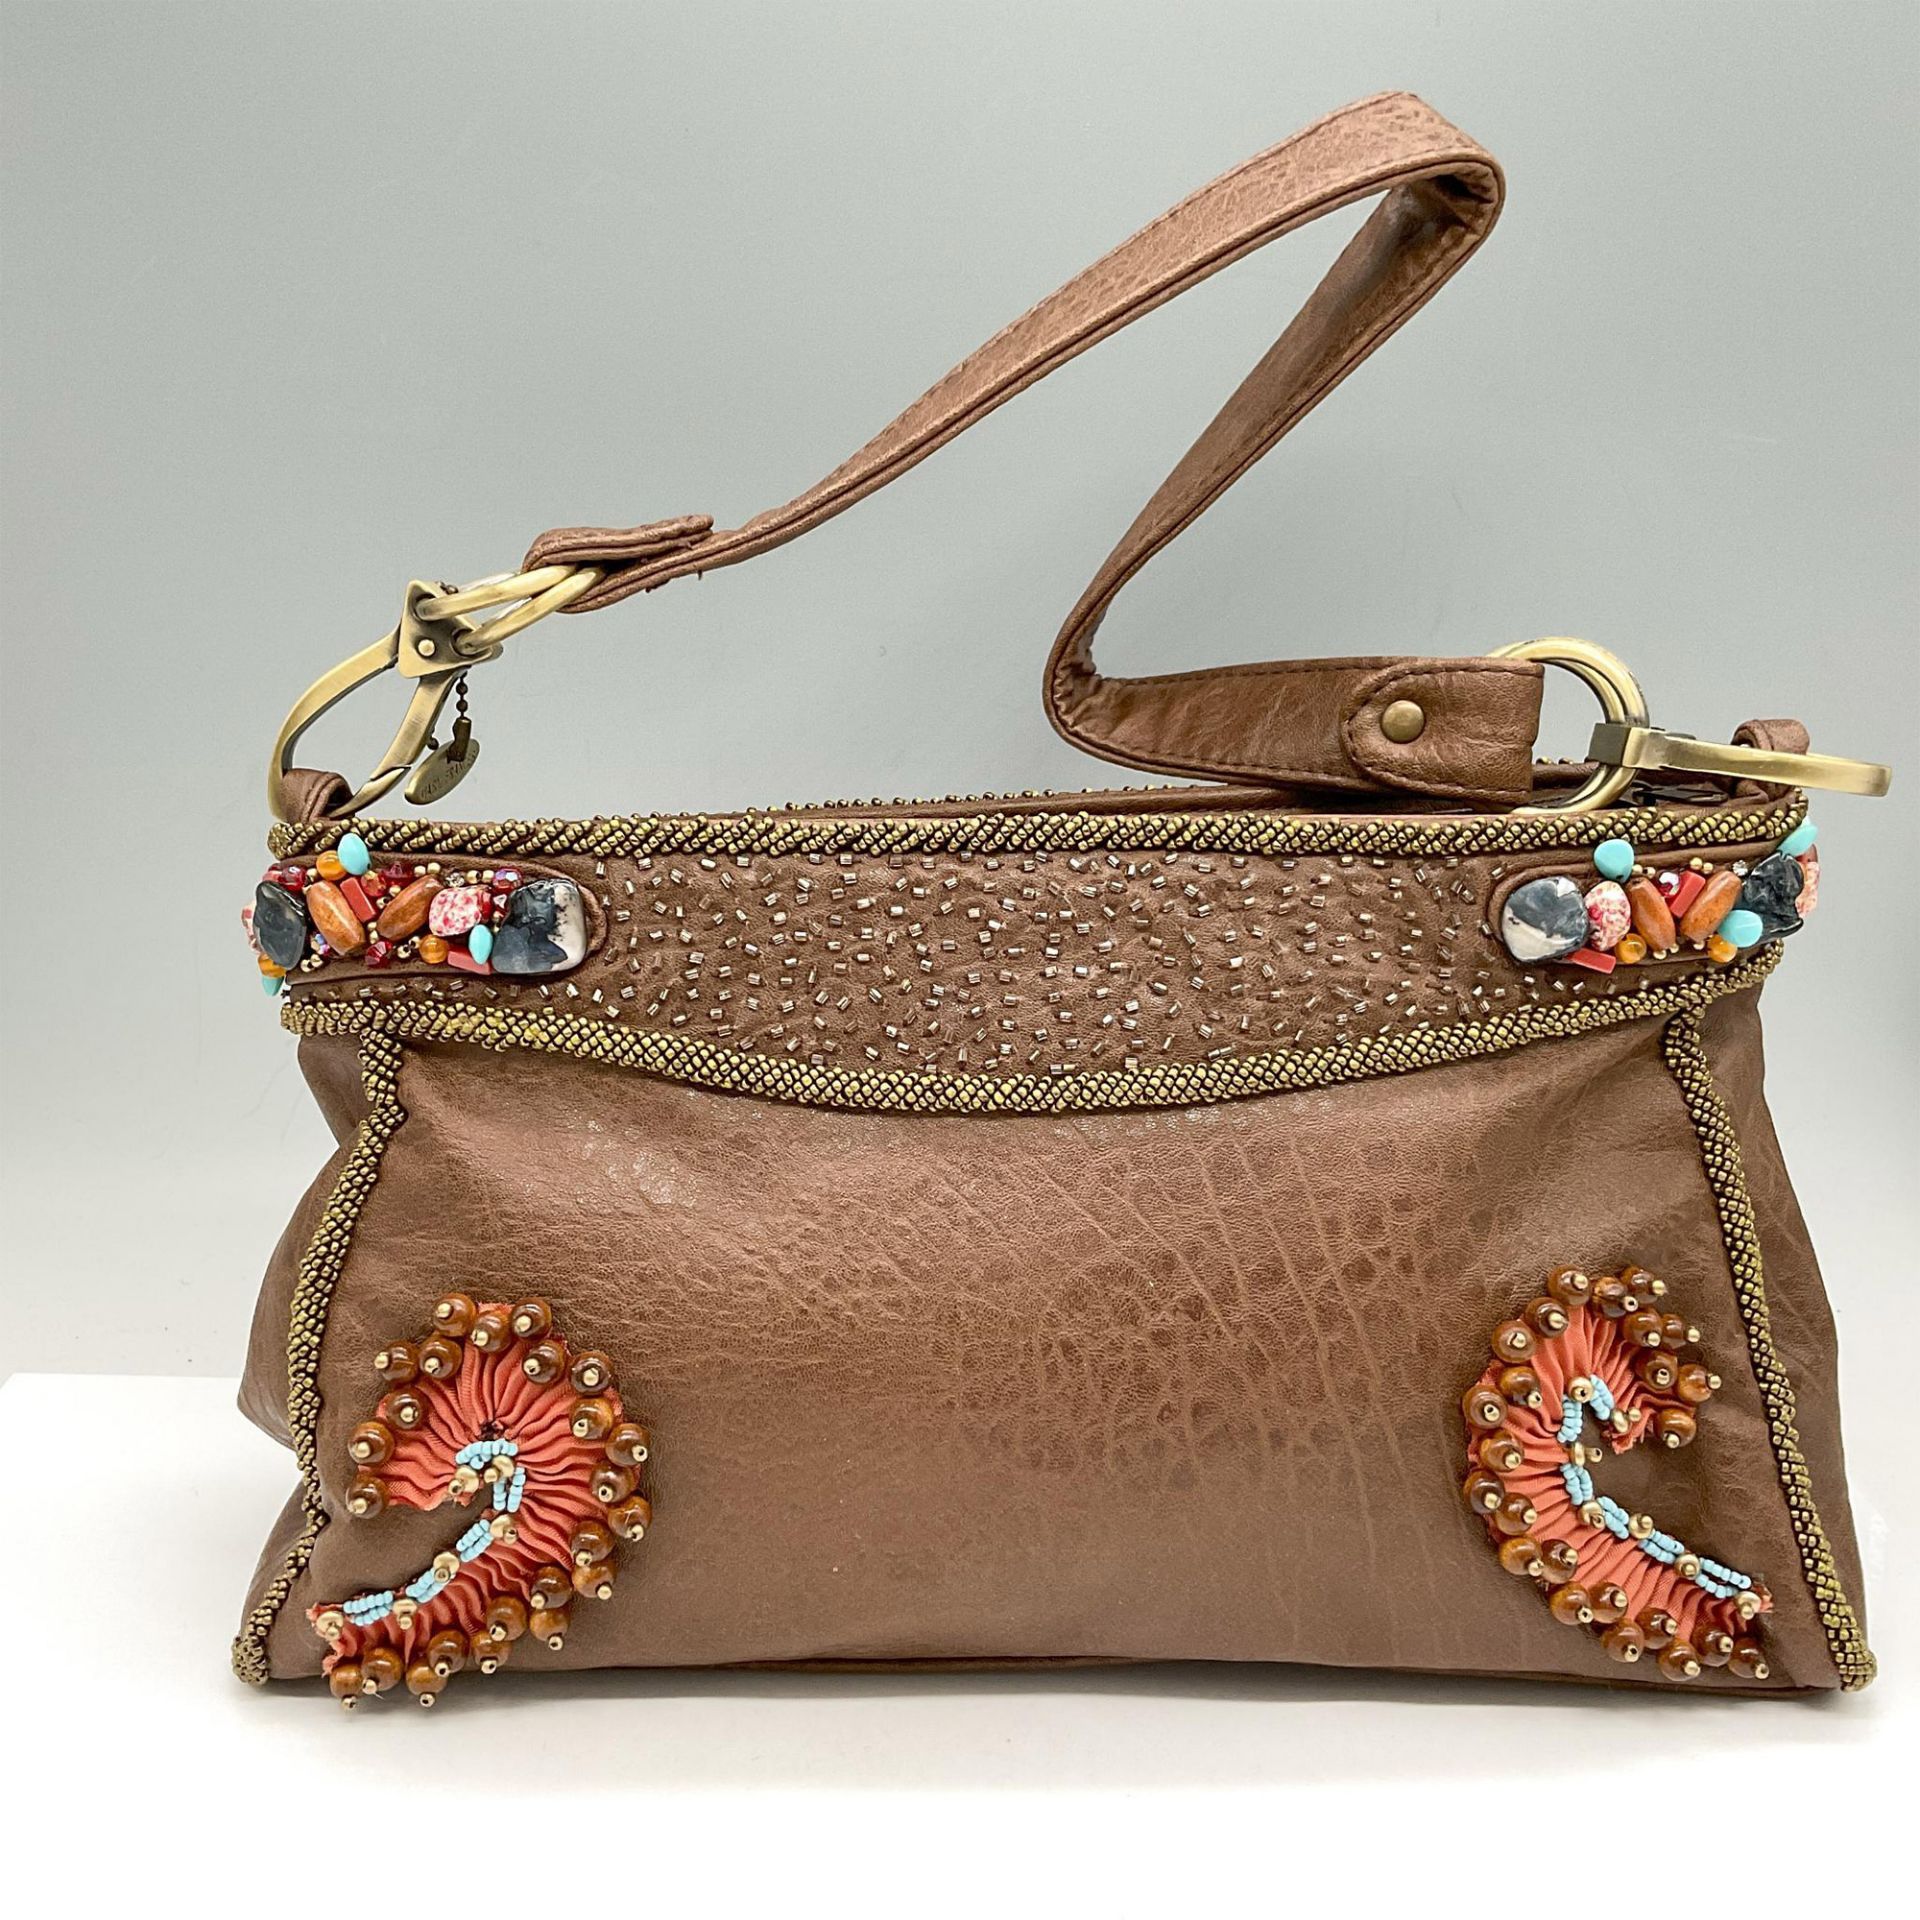 Mary Frances Hand Bag, Indian Summer - Image 2 of 4